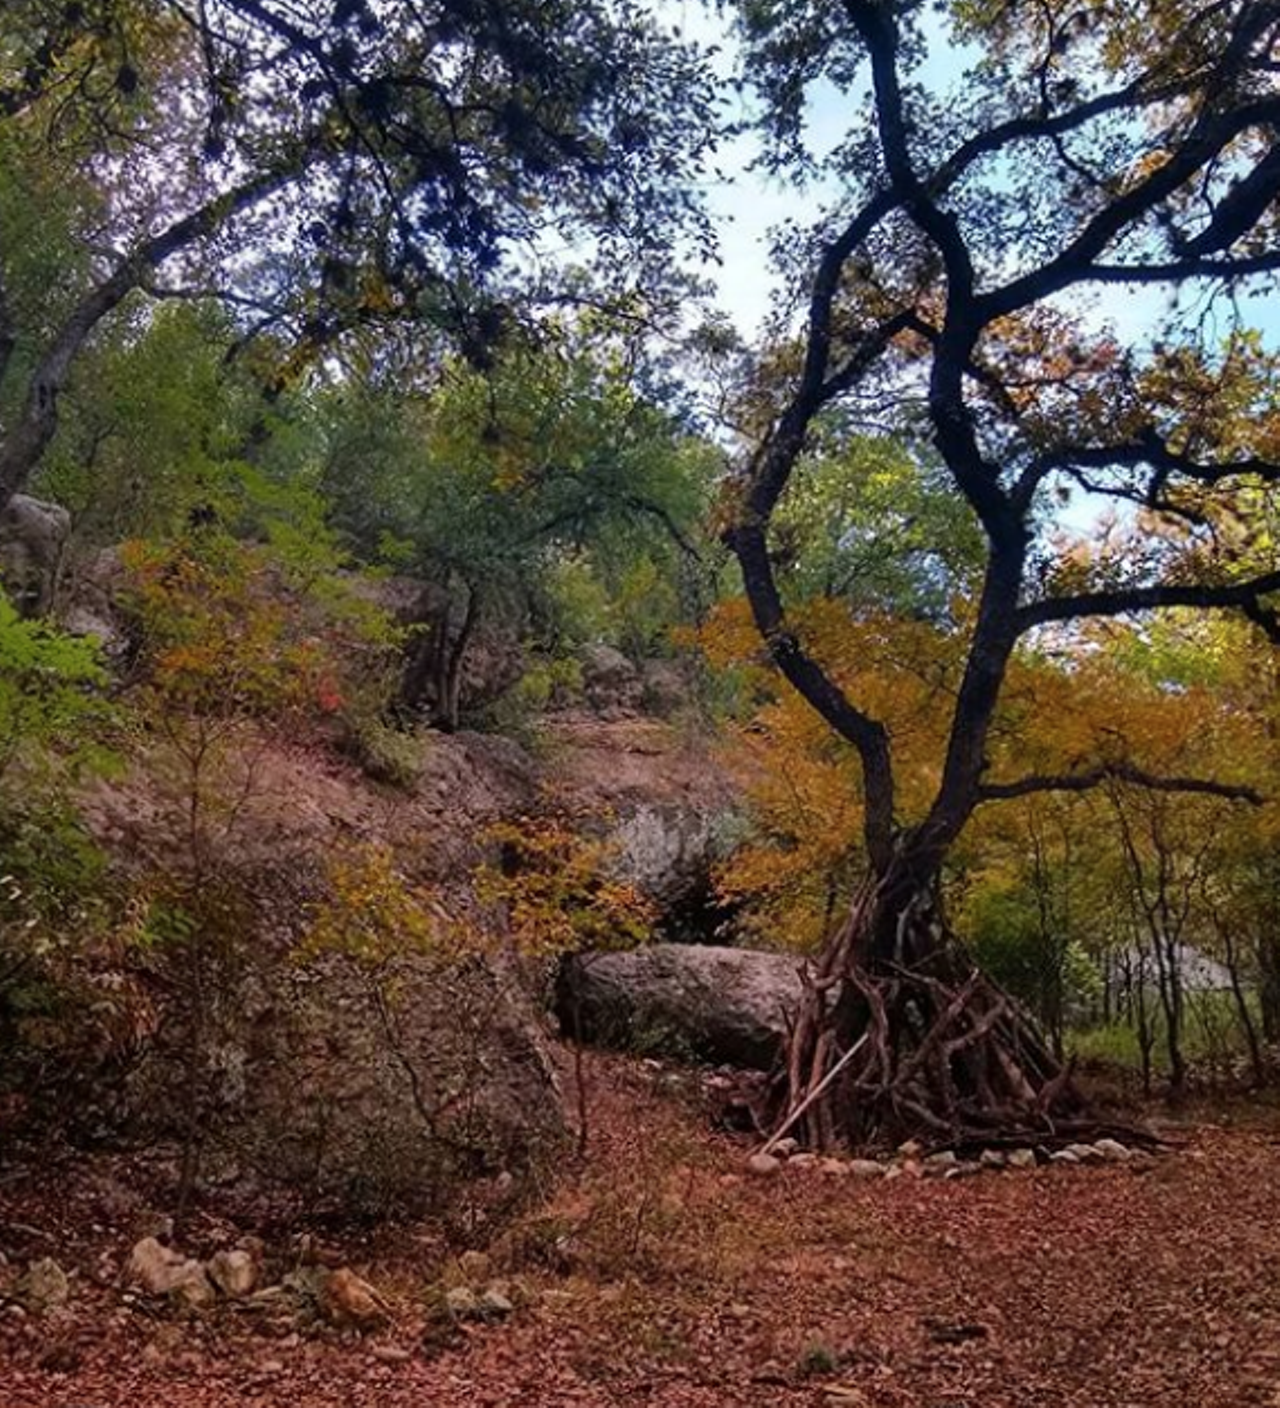 Cathedral Rock Park
8002 Grissom Road, (210) 207-7275, sanantonio.gov
Looking for a spot that gives serious nature vibes, but you don’t have to go far to get them? You’ll appreciate Cathedral Rock. Here you’ll be able to enjoy trails — whether you choose to bike or walk them — as well as big grassy areas and picnic tables too if you’re looking to sit back for a bit. There’s also playgrounds so the kids can run around.
Photo via Instagram / nic_is_nicole